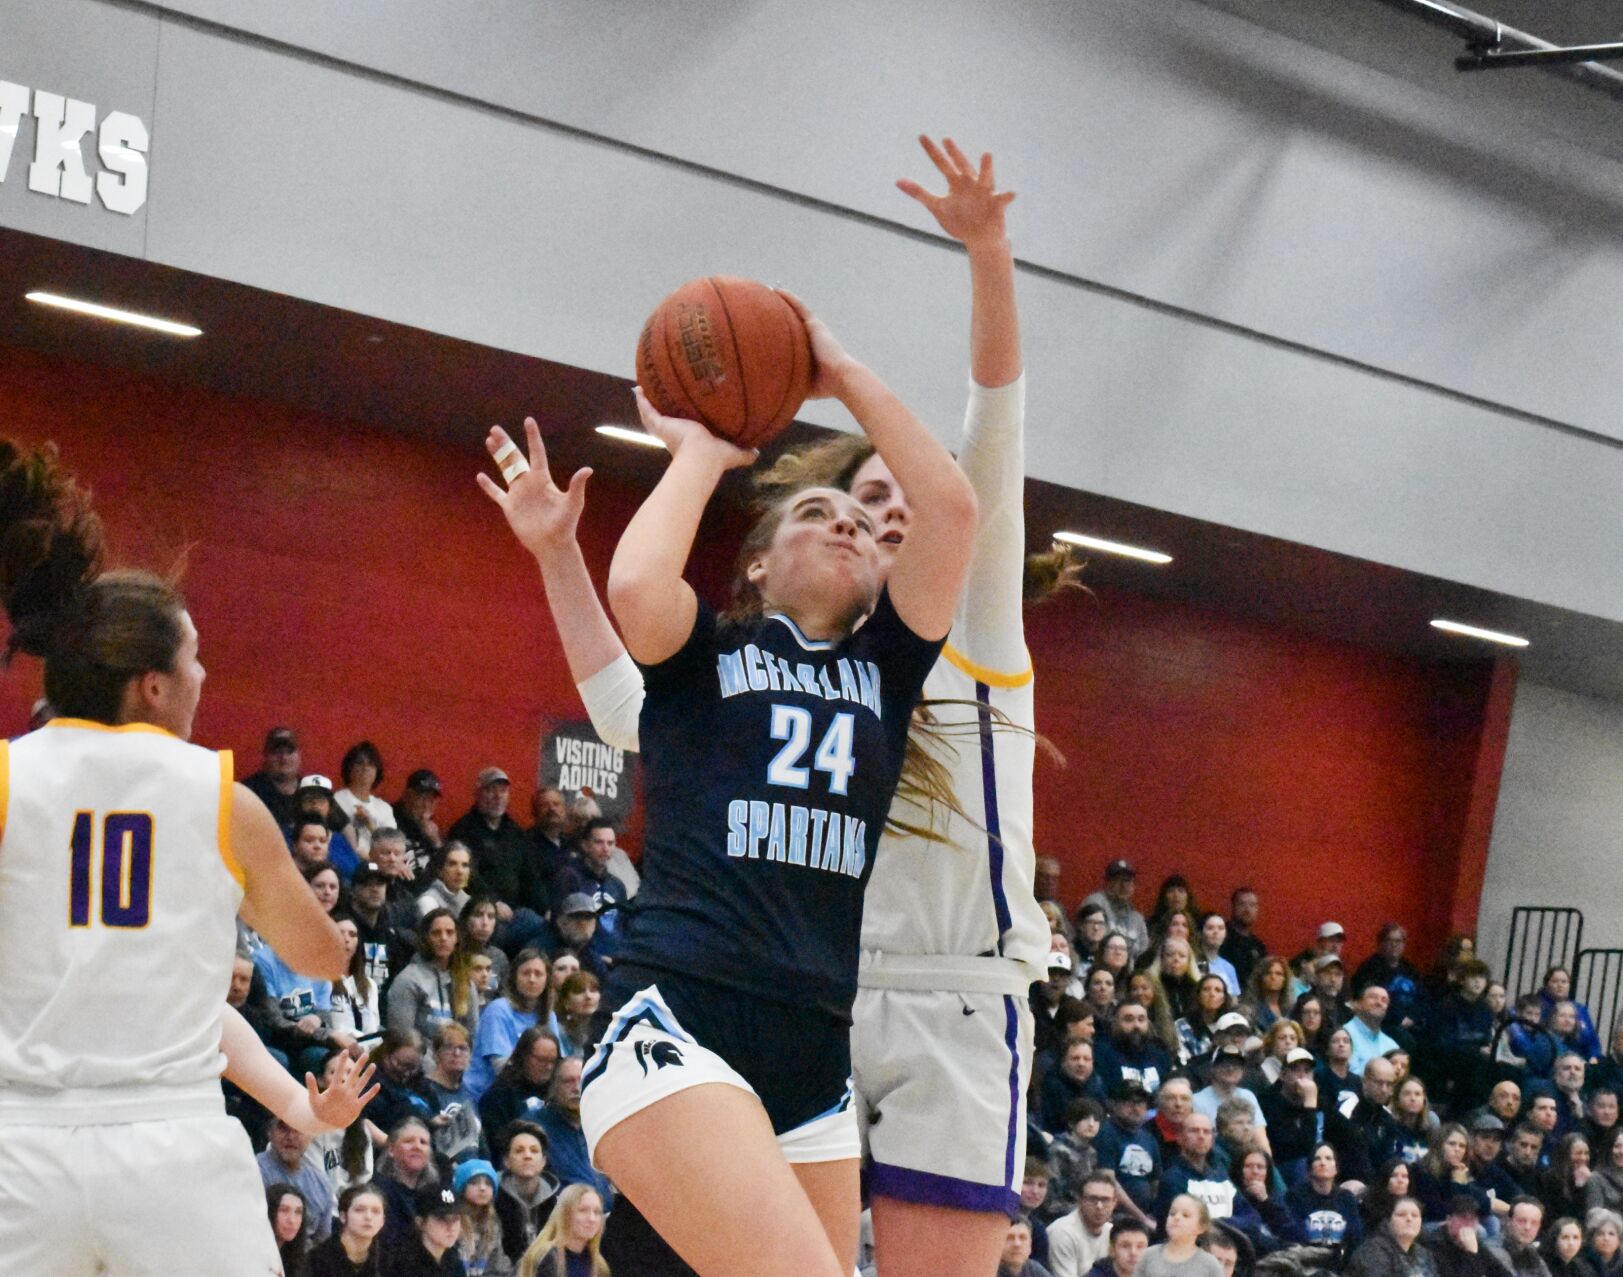 McFarland girls basketball: Ava Dean scores go-ahead basket, Spartans use late run to advance to sectional final